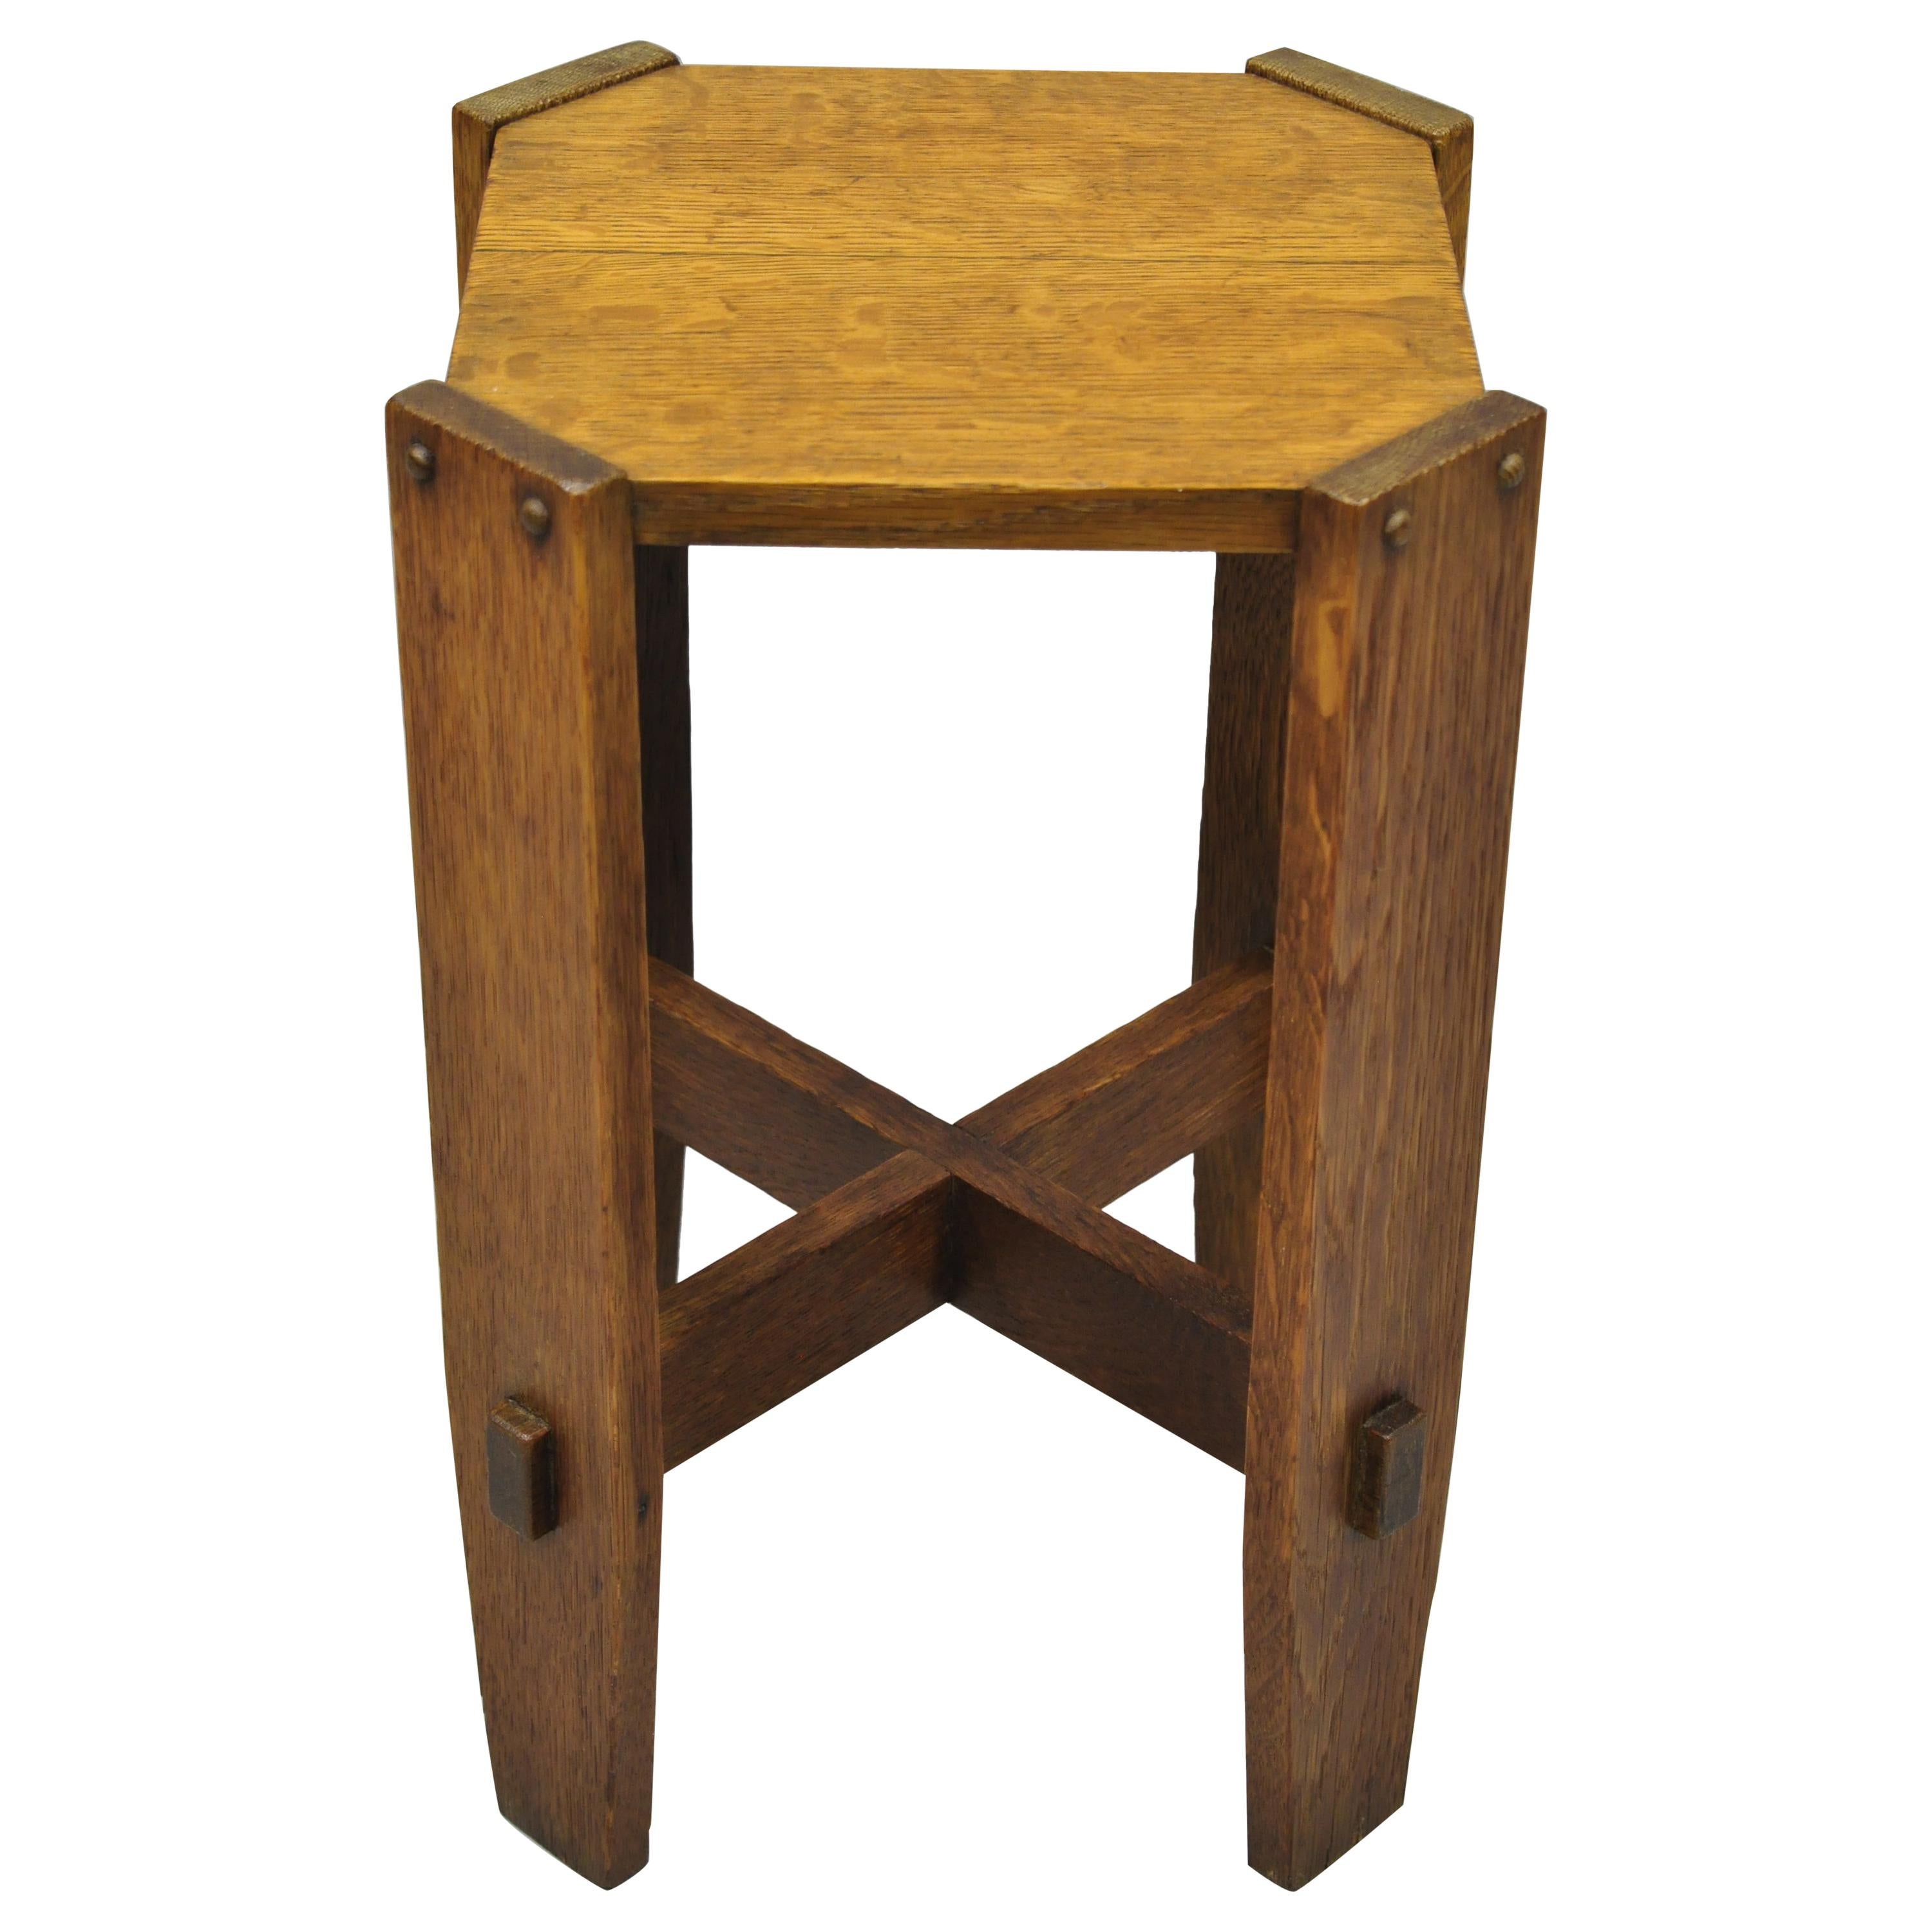 Mission Oak Arts & Crafts Side Table Plant Stand Attributed to Stickley Bros